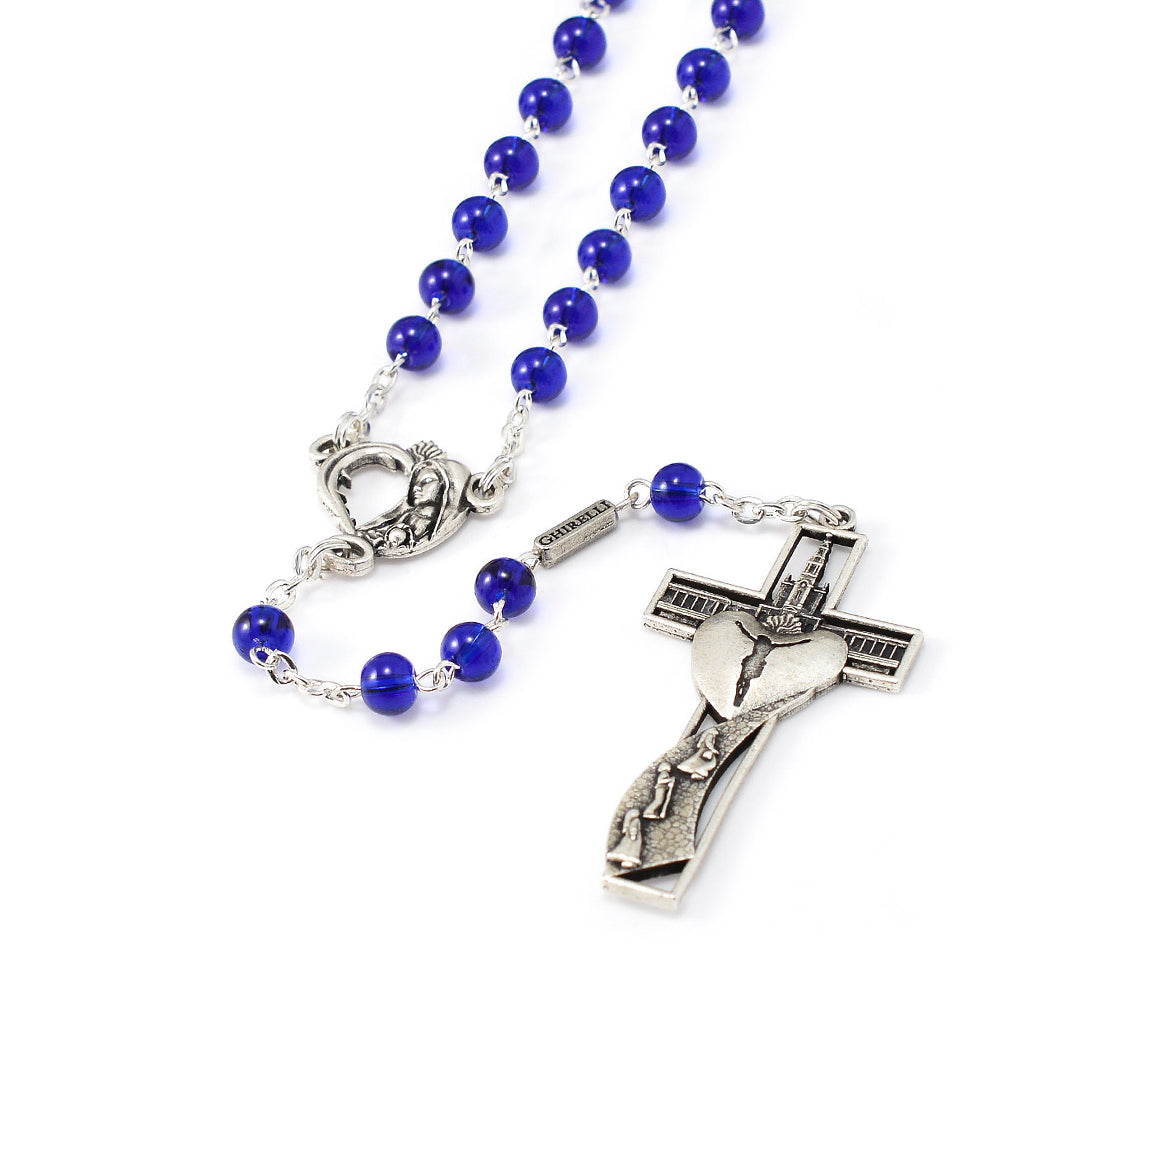 Our Lady of Fatima 100th Anniversary Rosary